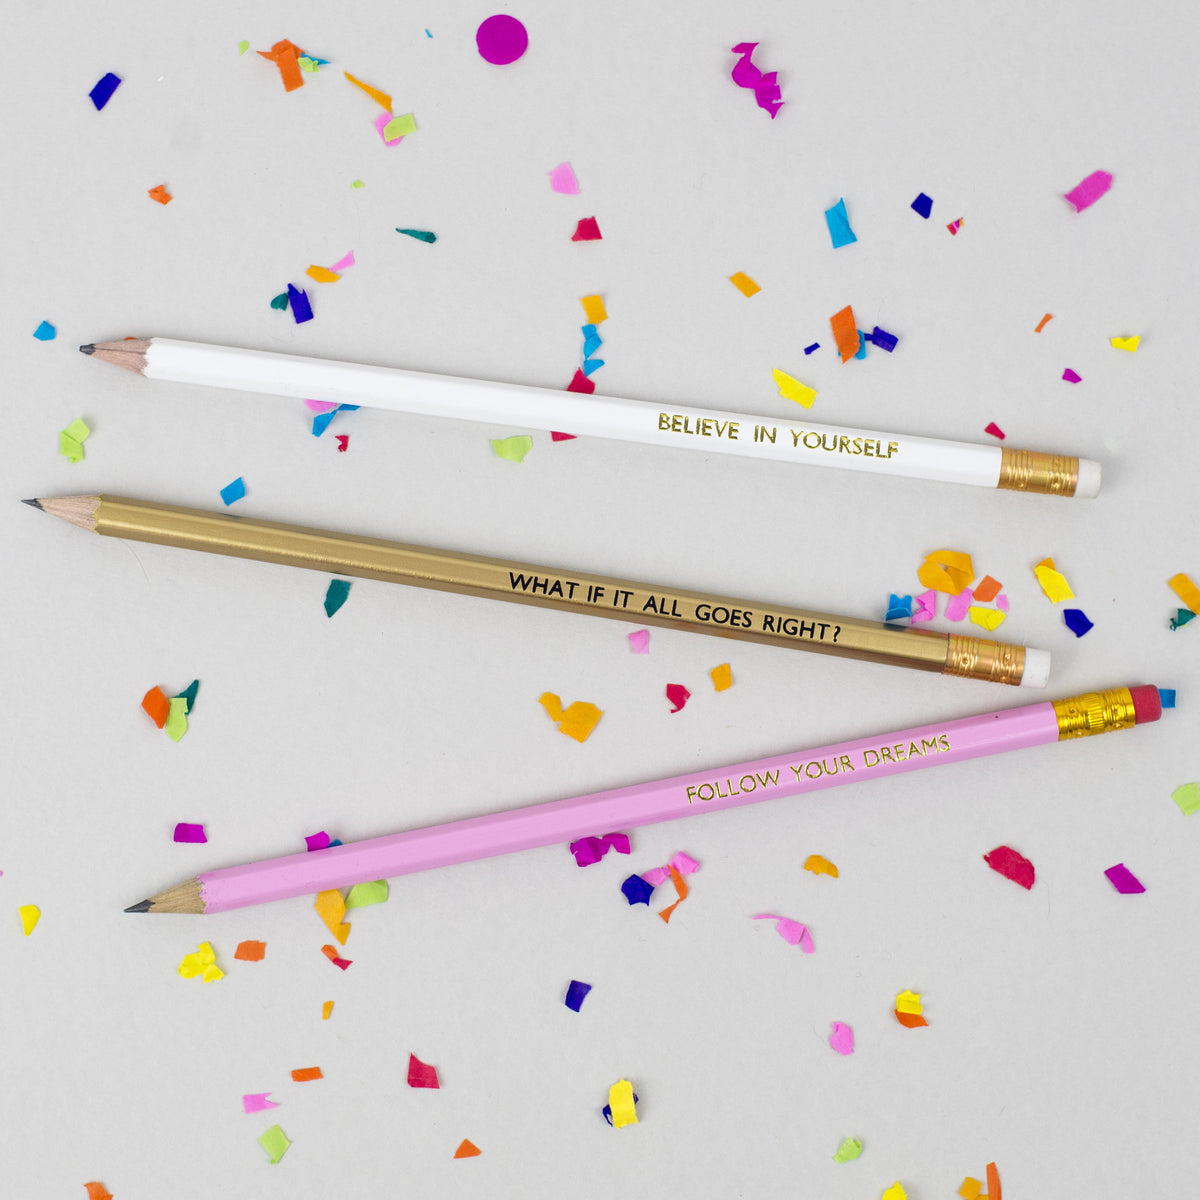 Follow Your Dreams / Believe In Yourself / What If It All Goes Right? - Pack of 3 Jolly Good Pencils